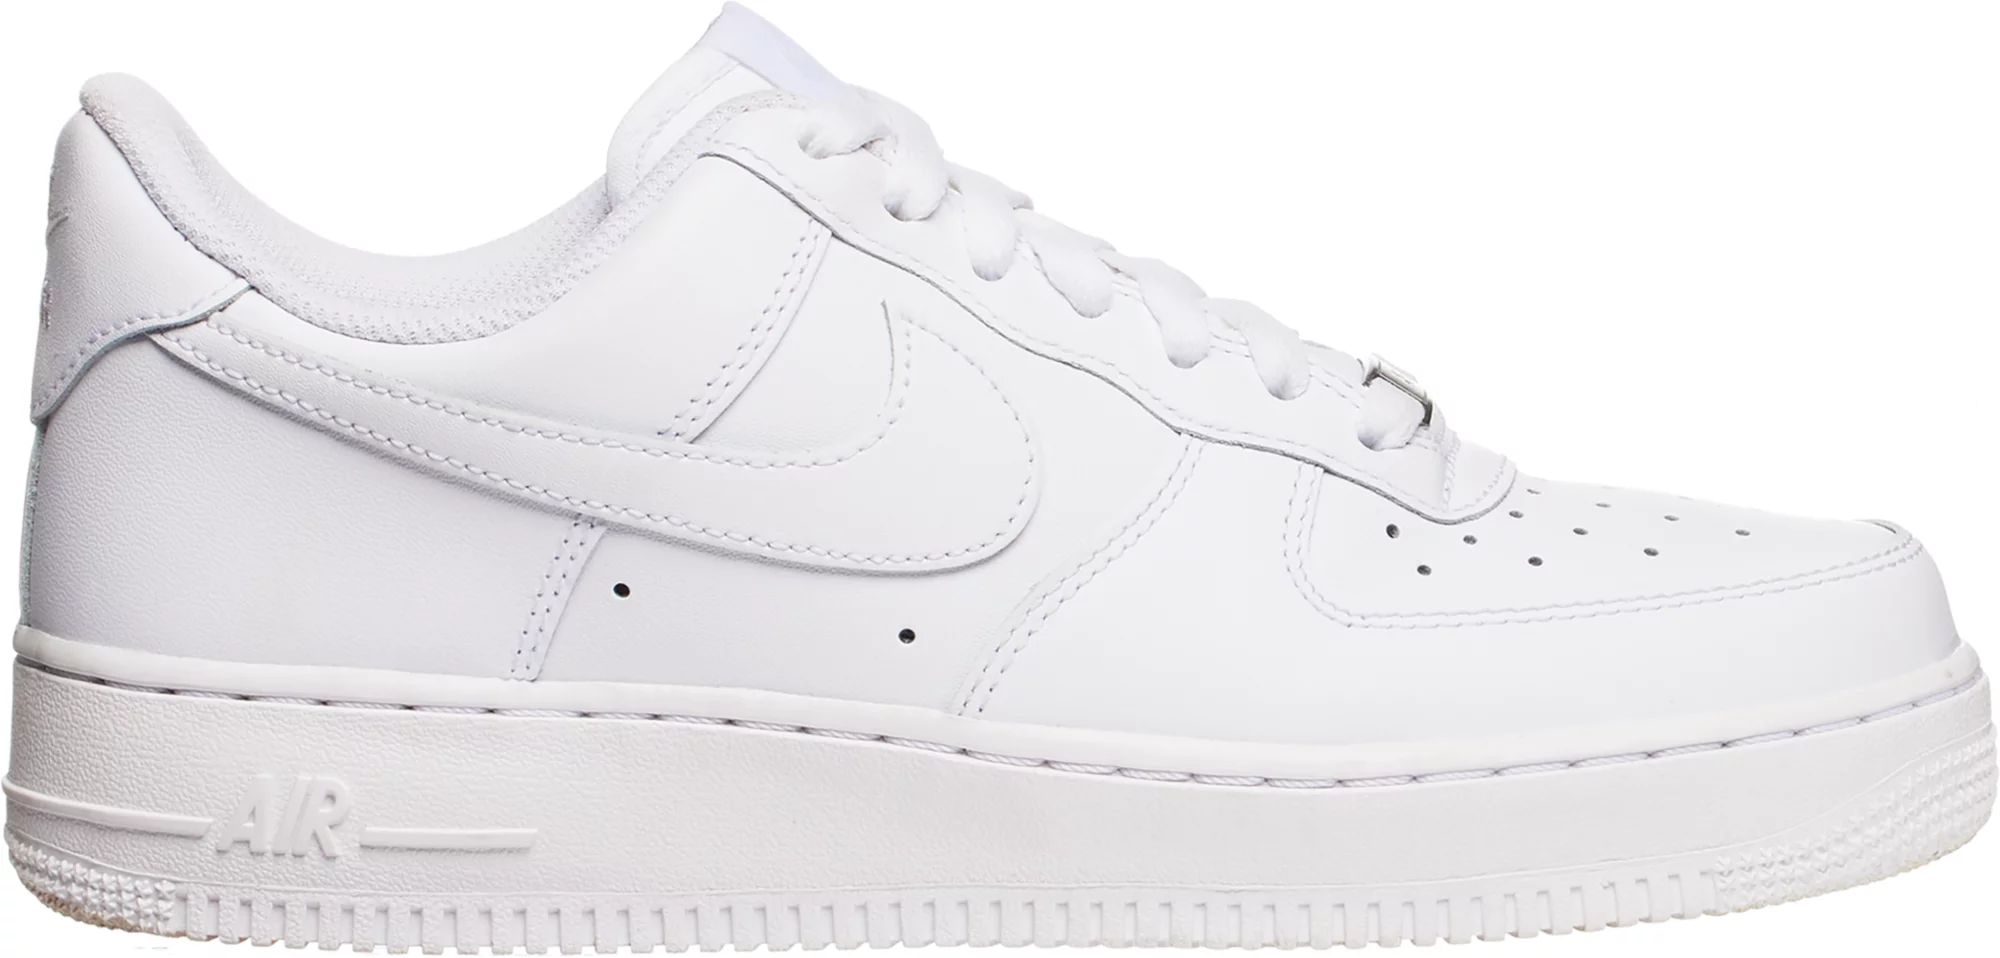 Nike Women's Air Force 1 '07 Shoes, Size 7, Nike Af1 White | Dick's Sporting Goods